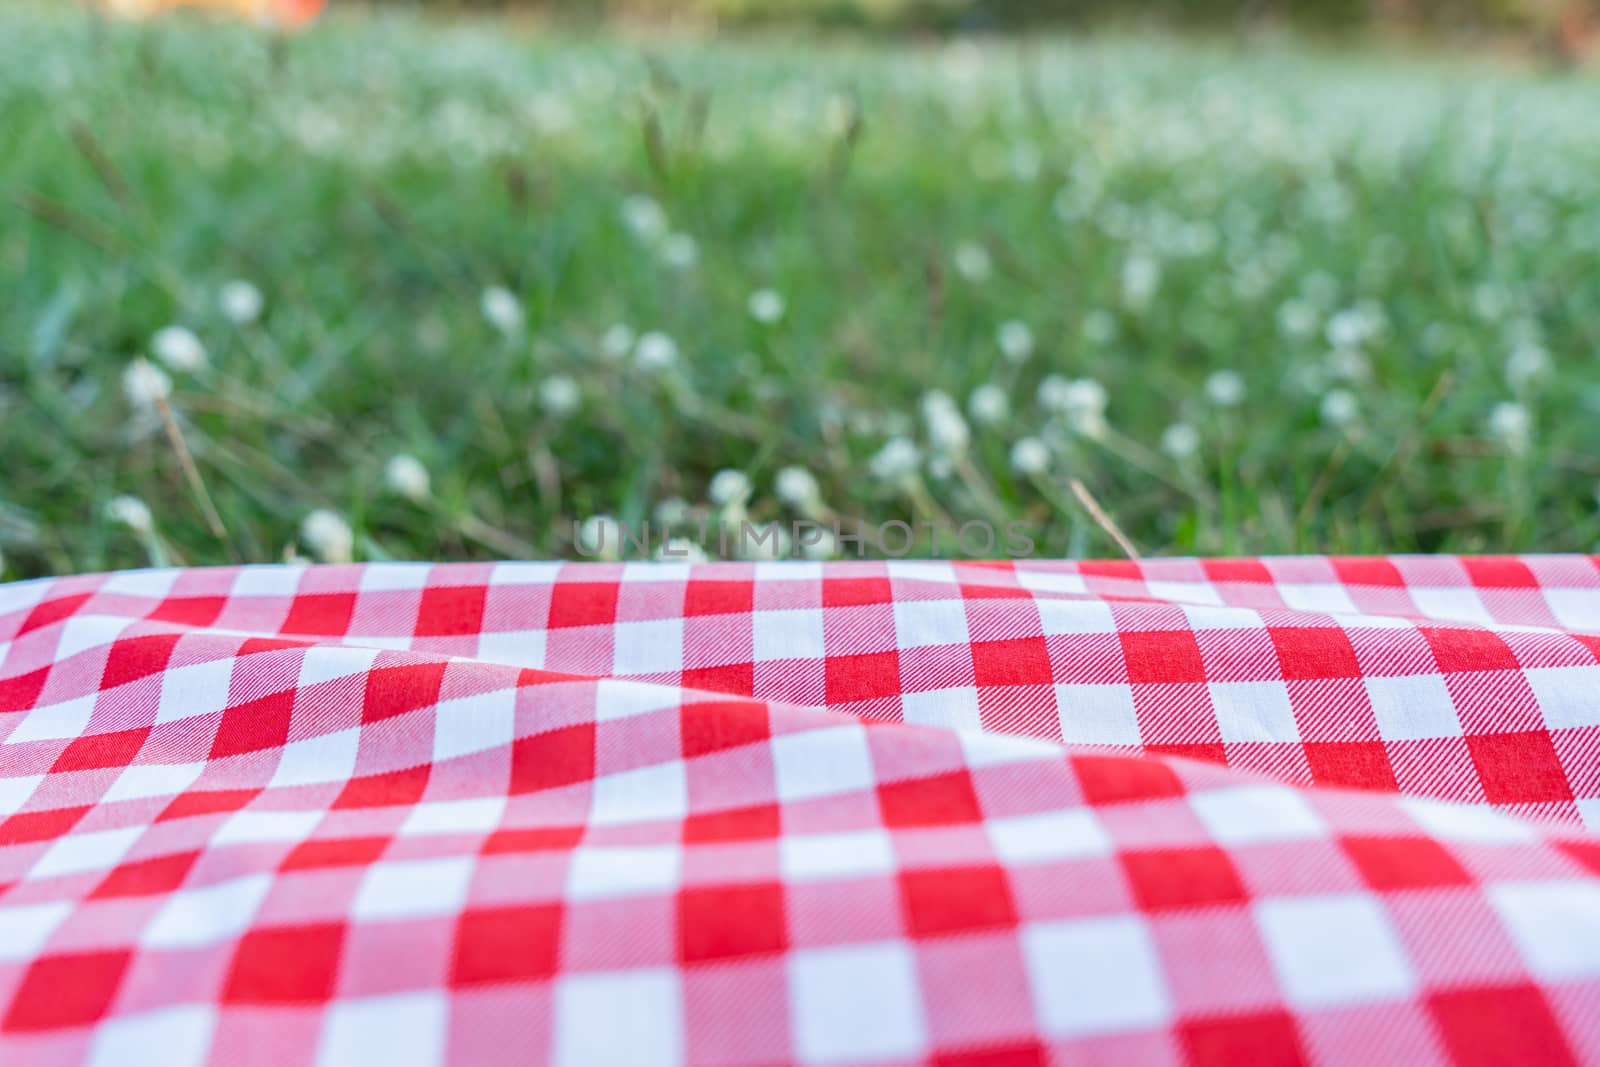 Red checkered tablecloth texture with on green grass at the garden